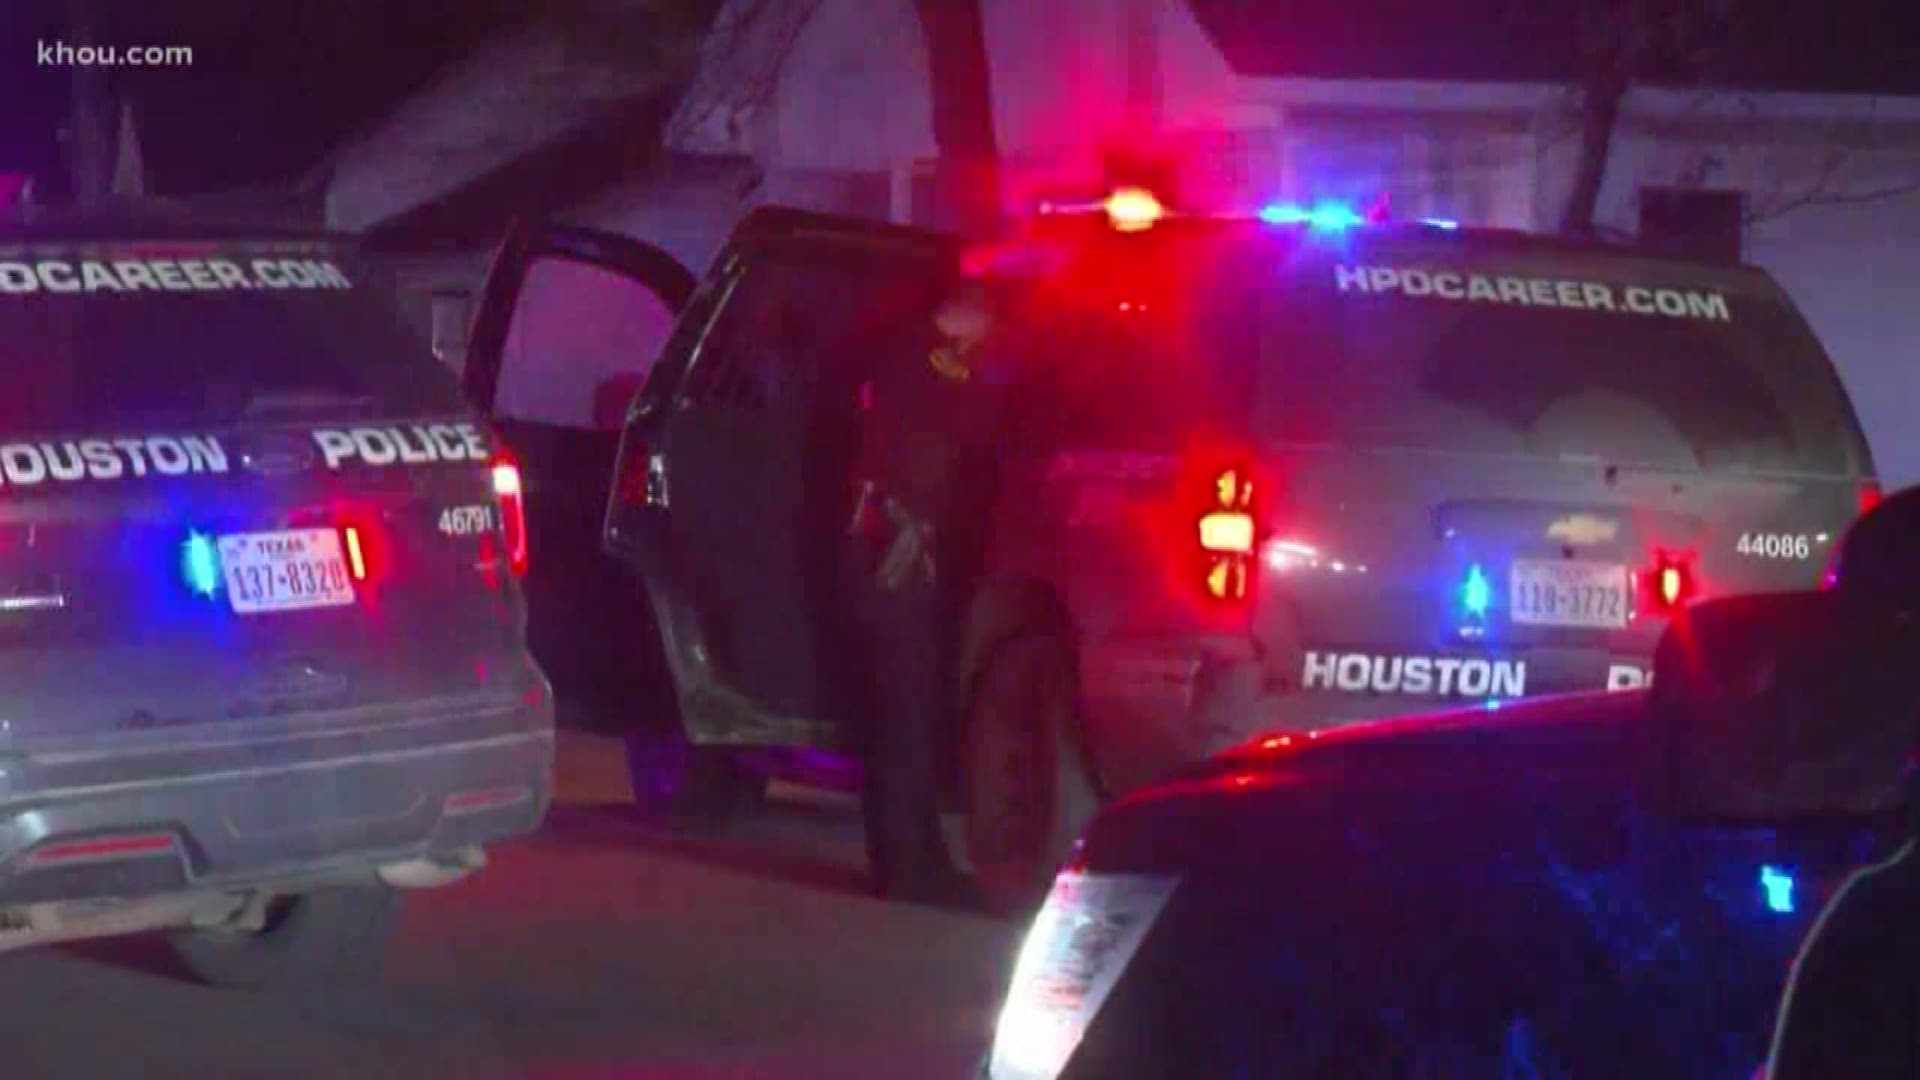 Two men were taken into custody after leading on a 49 minute high-speed chase through Houston's east side.